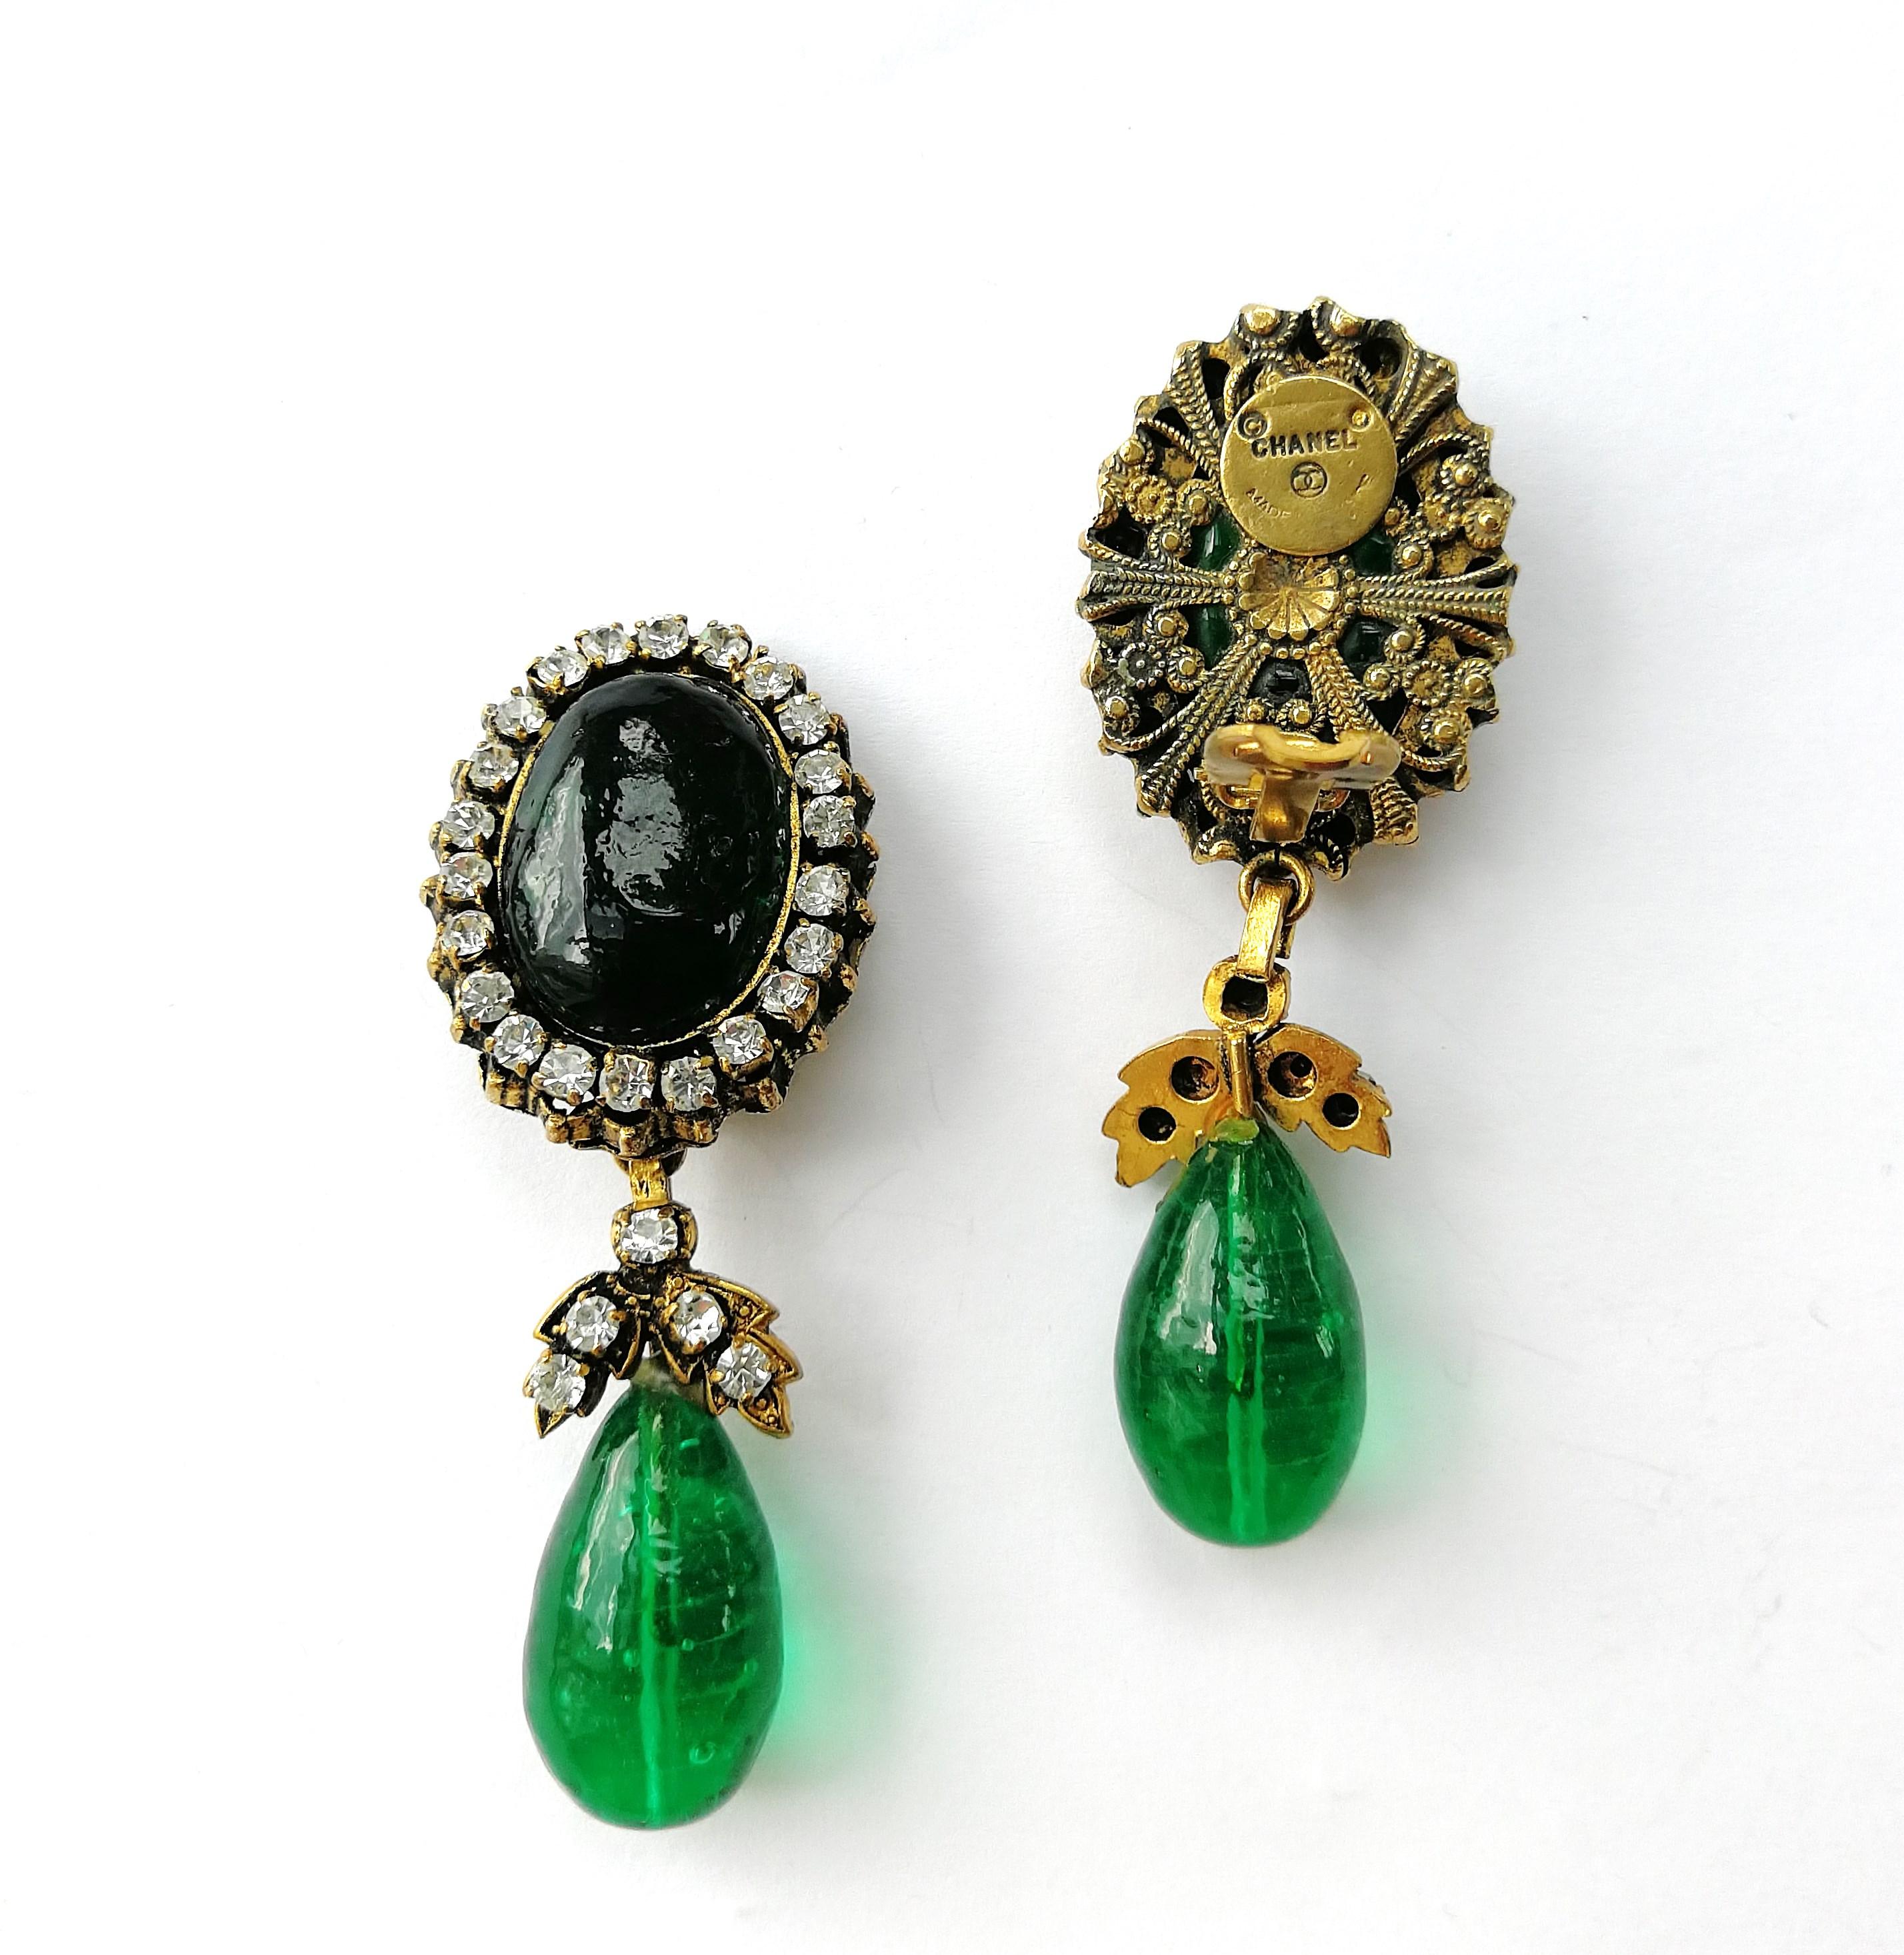 A beautiful and eye catching pair of emerald and clear paste drop earrings, made by Maison Gripoix for Chanel in the late 1970s/early 1980s. A large emerald poured glass cabuchon sits on the ear, circled in clear pastes, and a luscious emerald